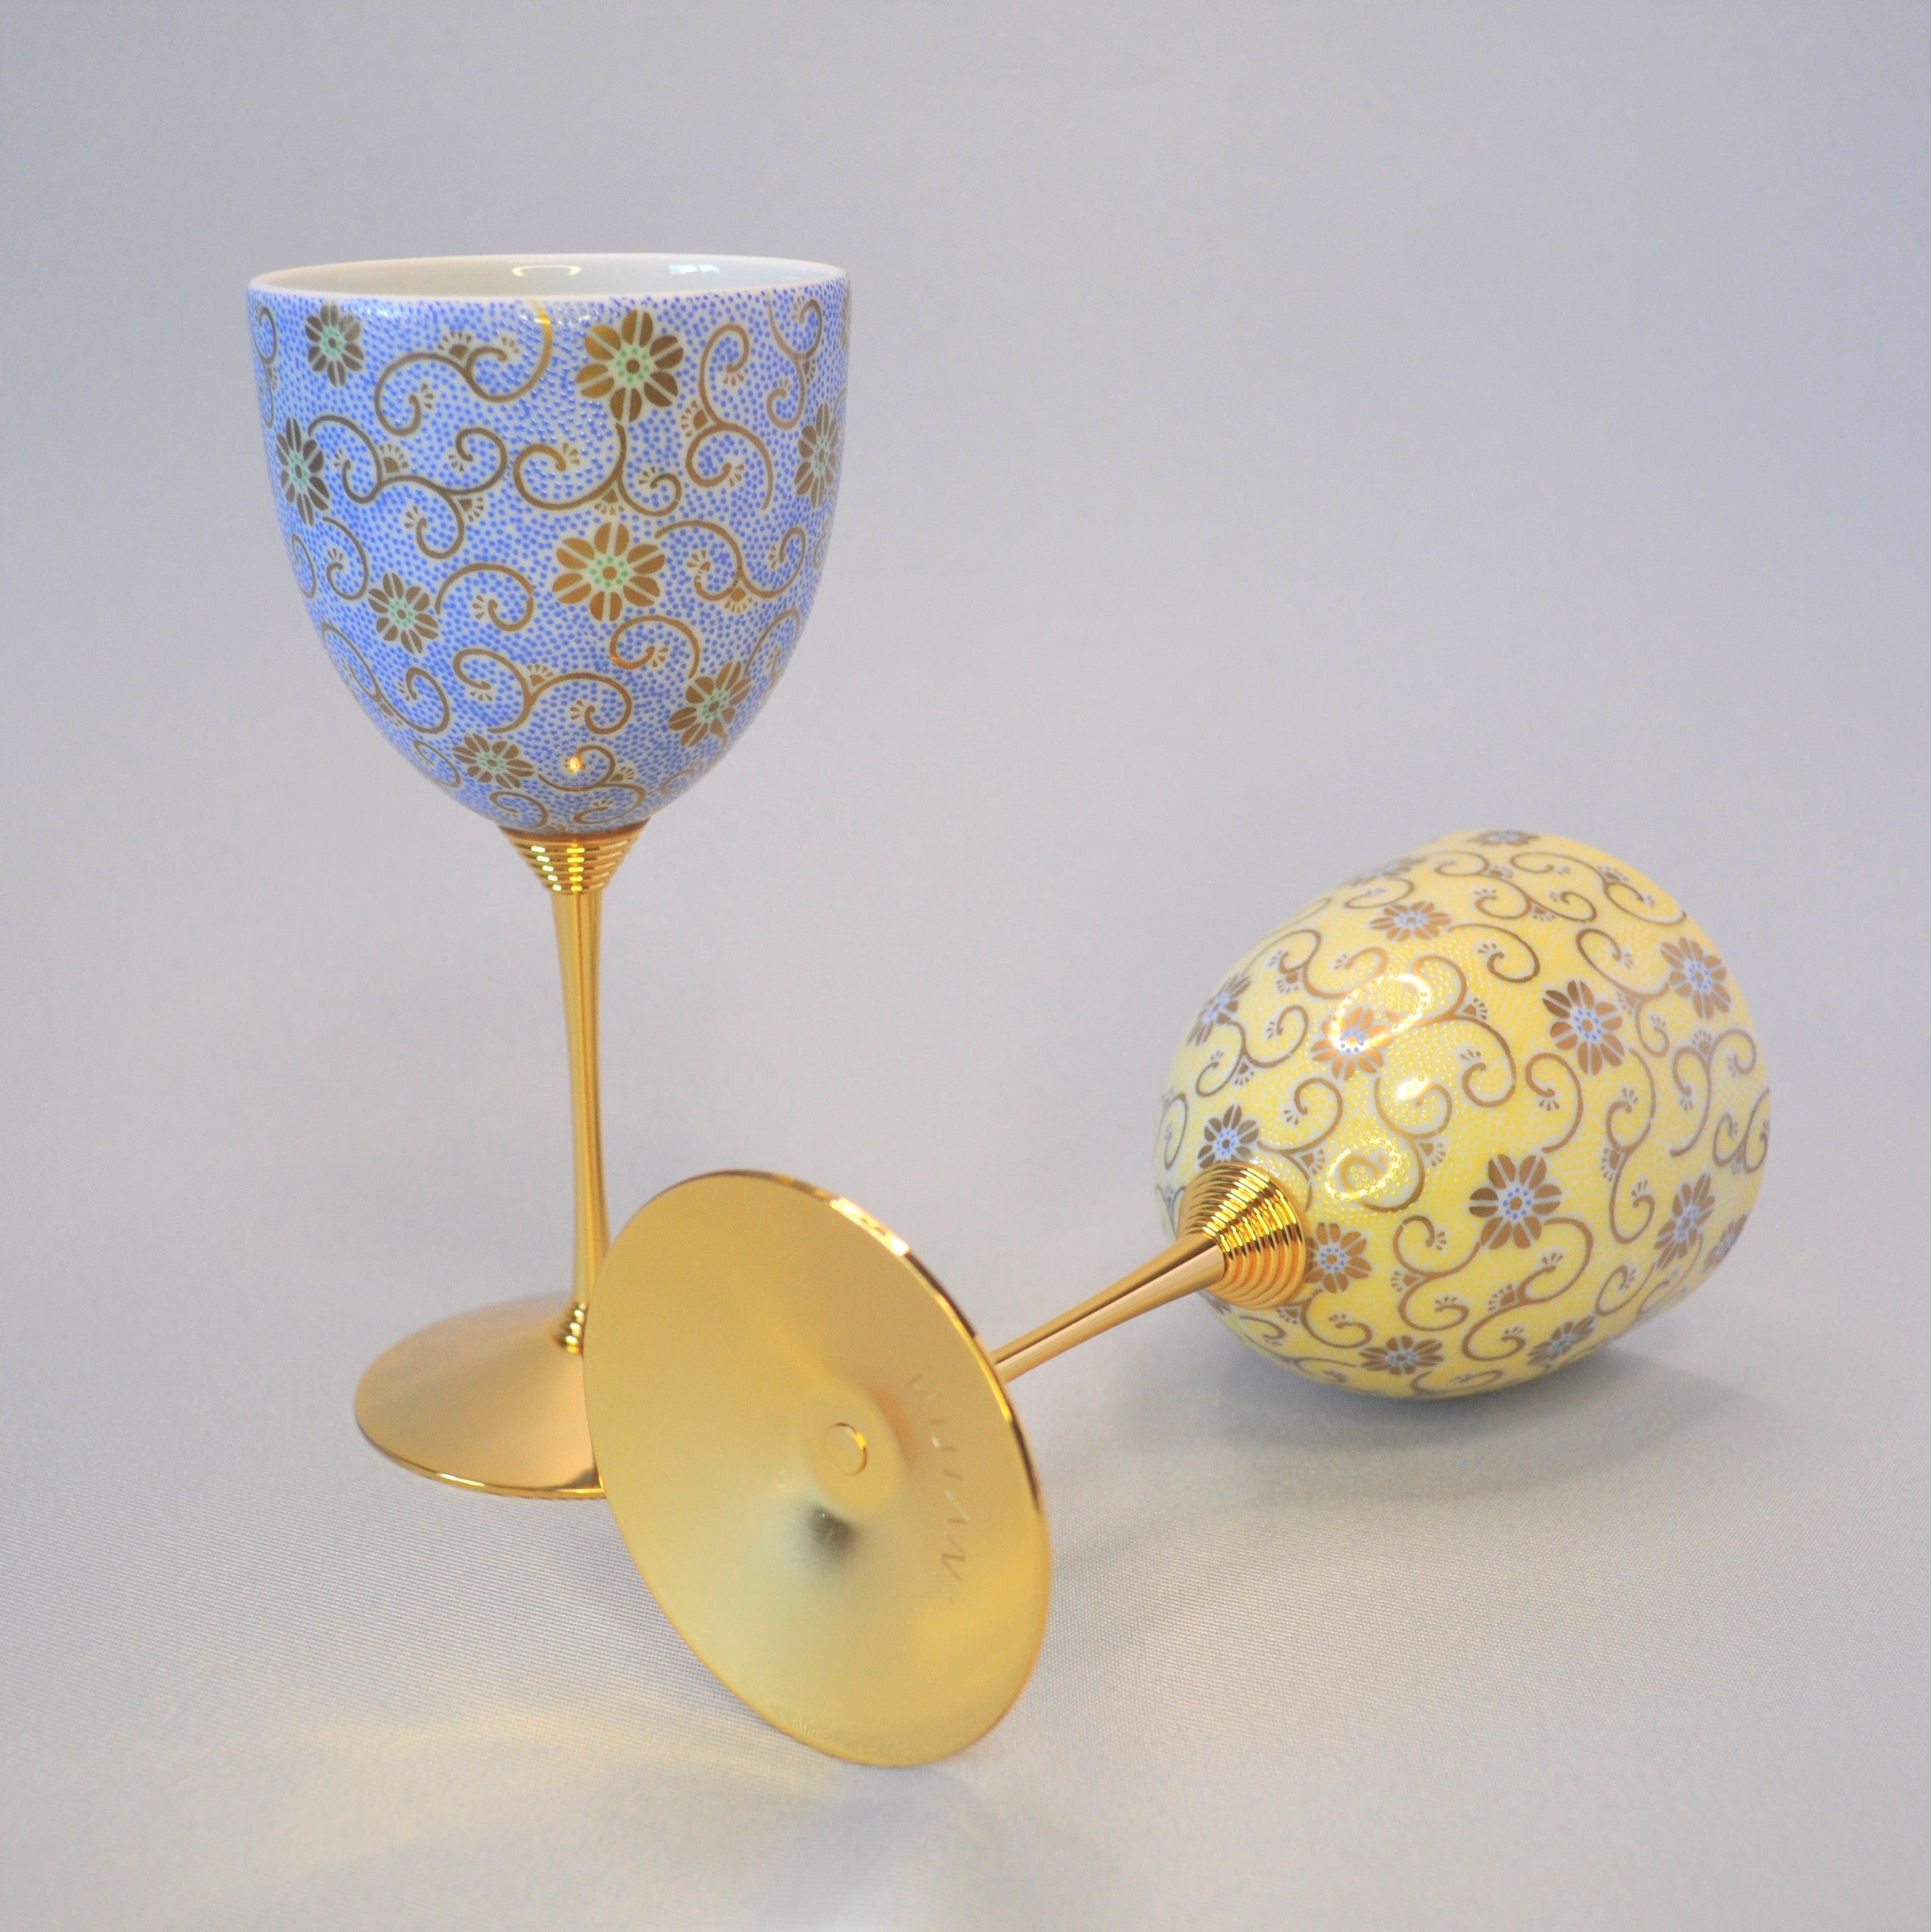 Pair of Wine Goblets (Color Foliage Scroll)